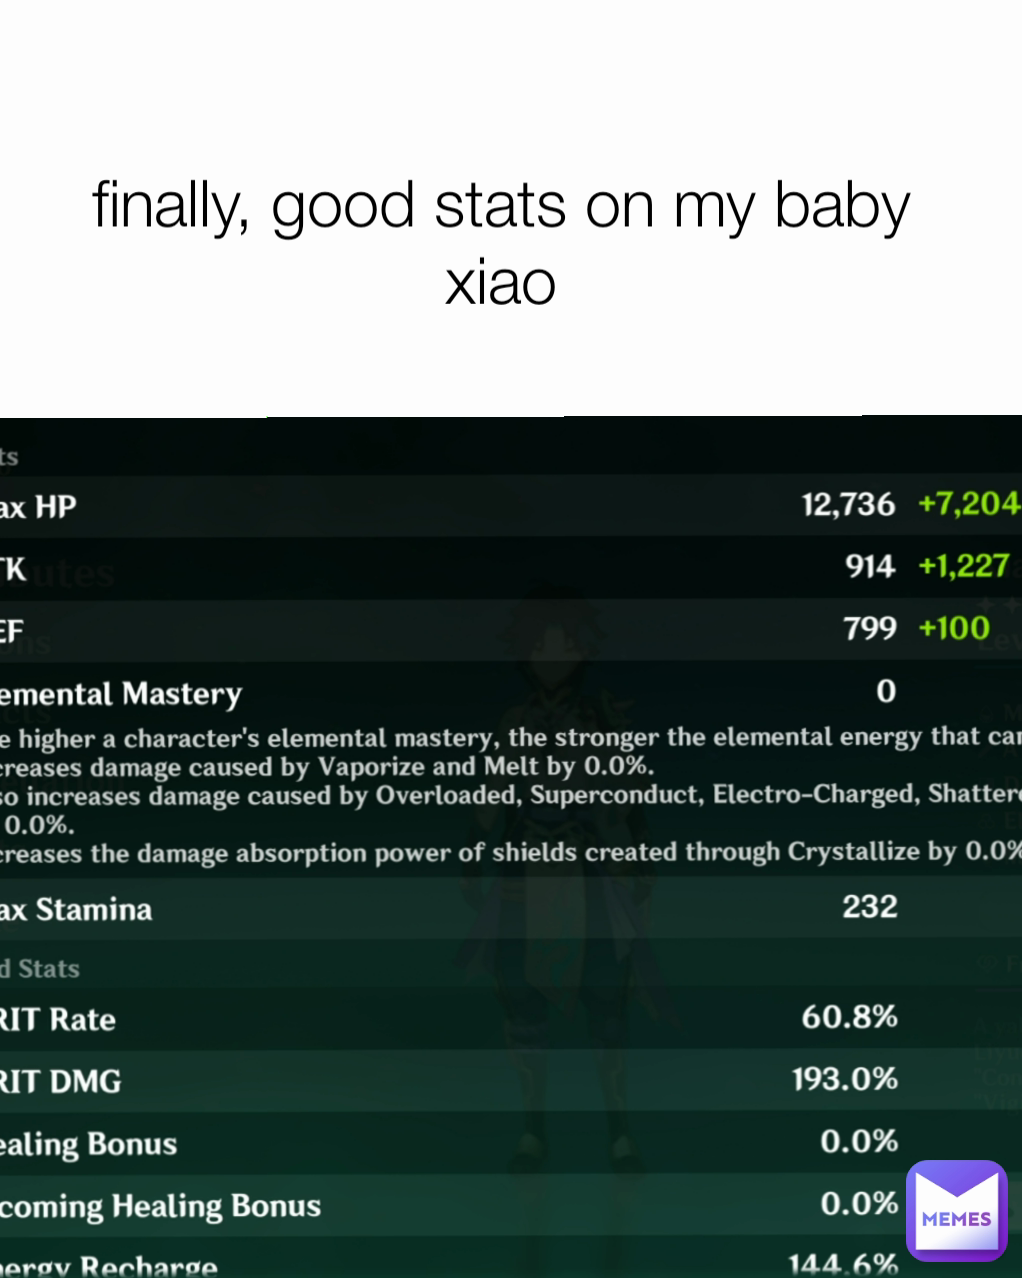 finally, good stats on my baby xiao